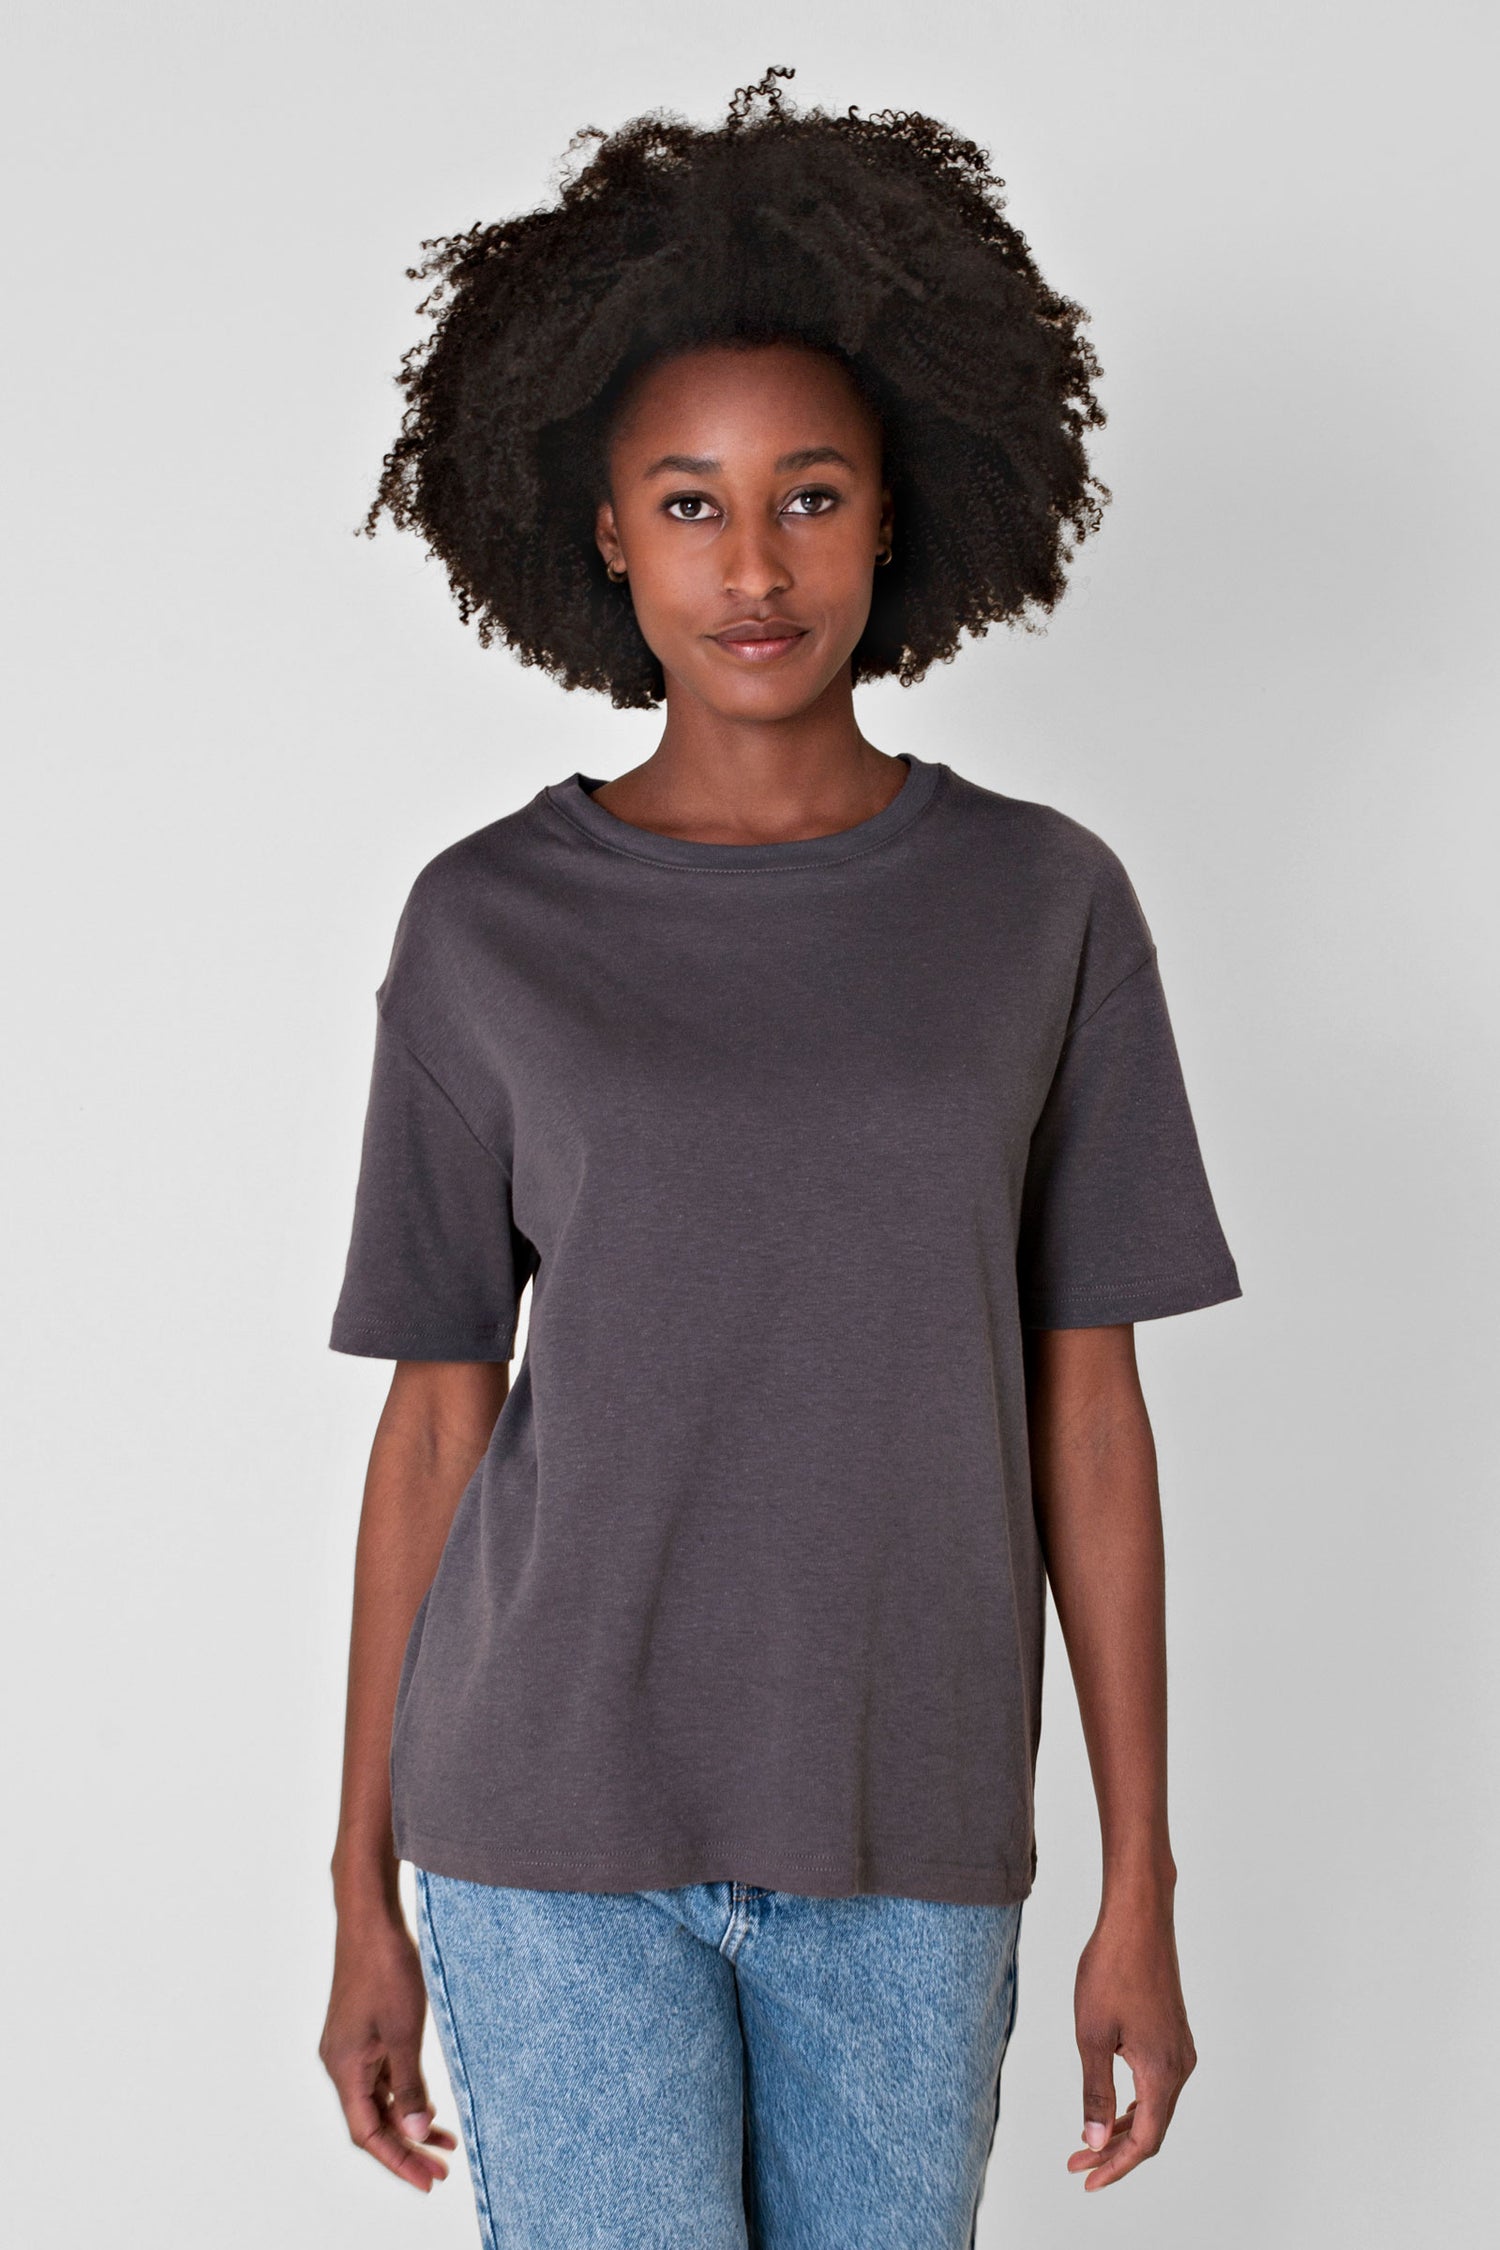 Soft and smooth boyfriend fit t-shirt made from a beautiful interlock hemp and organic cotton jersey. Breathable and anti-allergenic to the skin, this will easily be your summer's favorite hemp t-shirt.